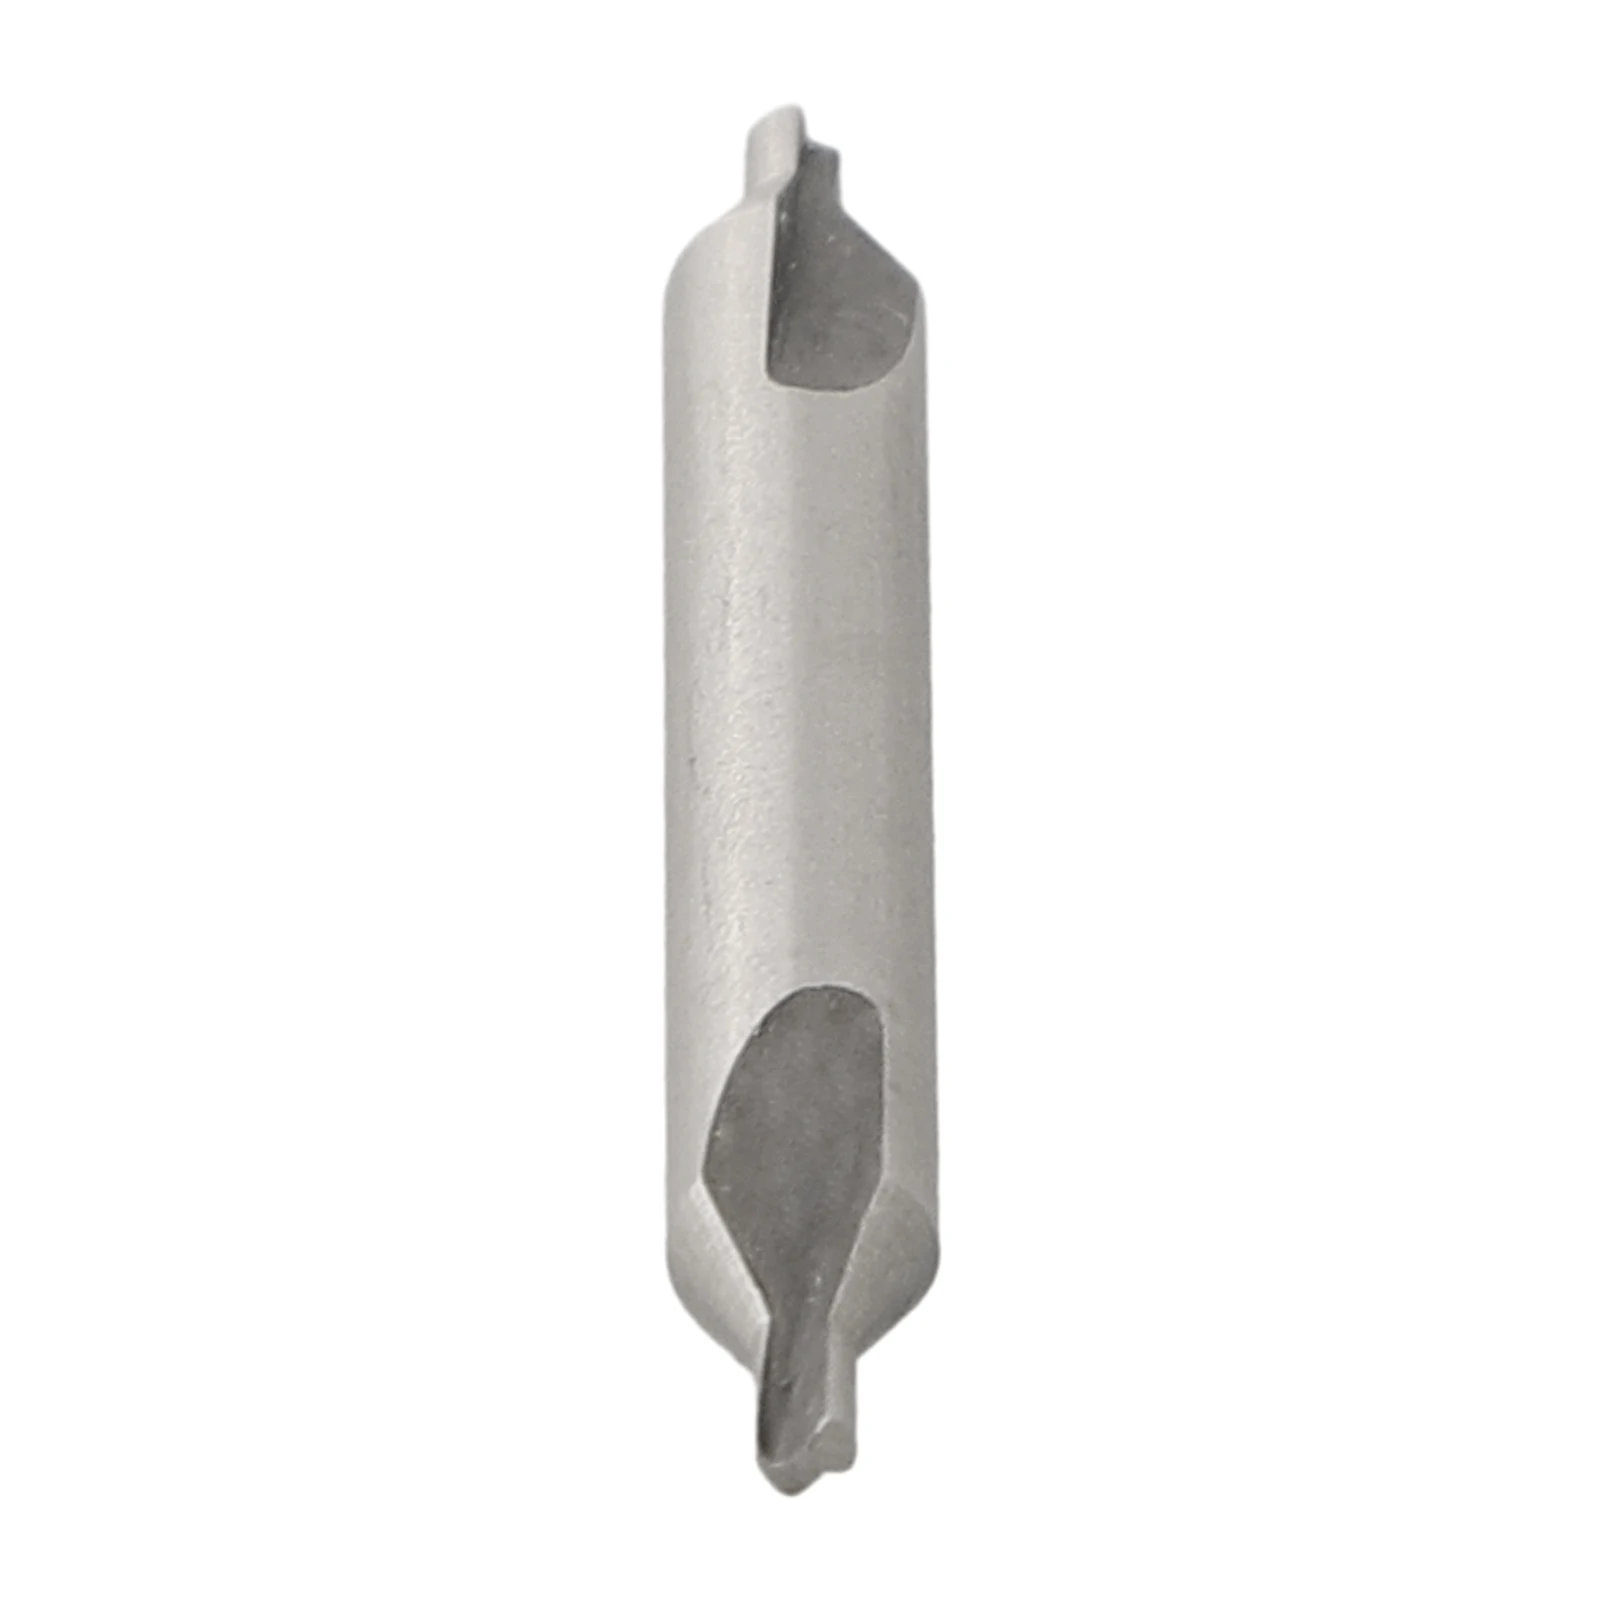 

Reliable Center Drill Bits 10pcs High Speed Steel Countersinks 60 Degree Angle Perfect for Center Hole Machining